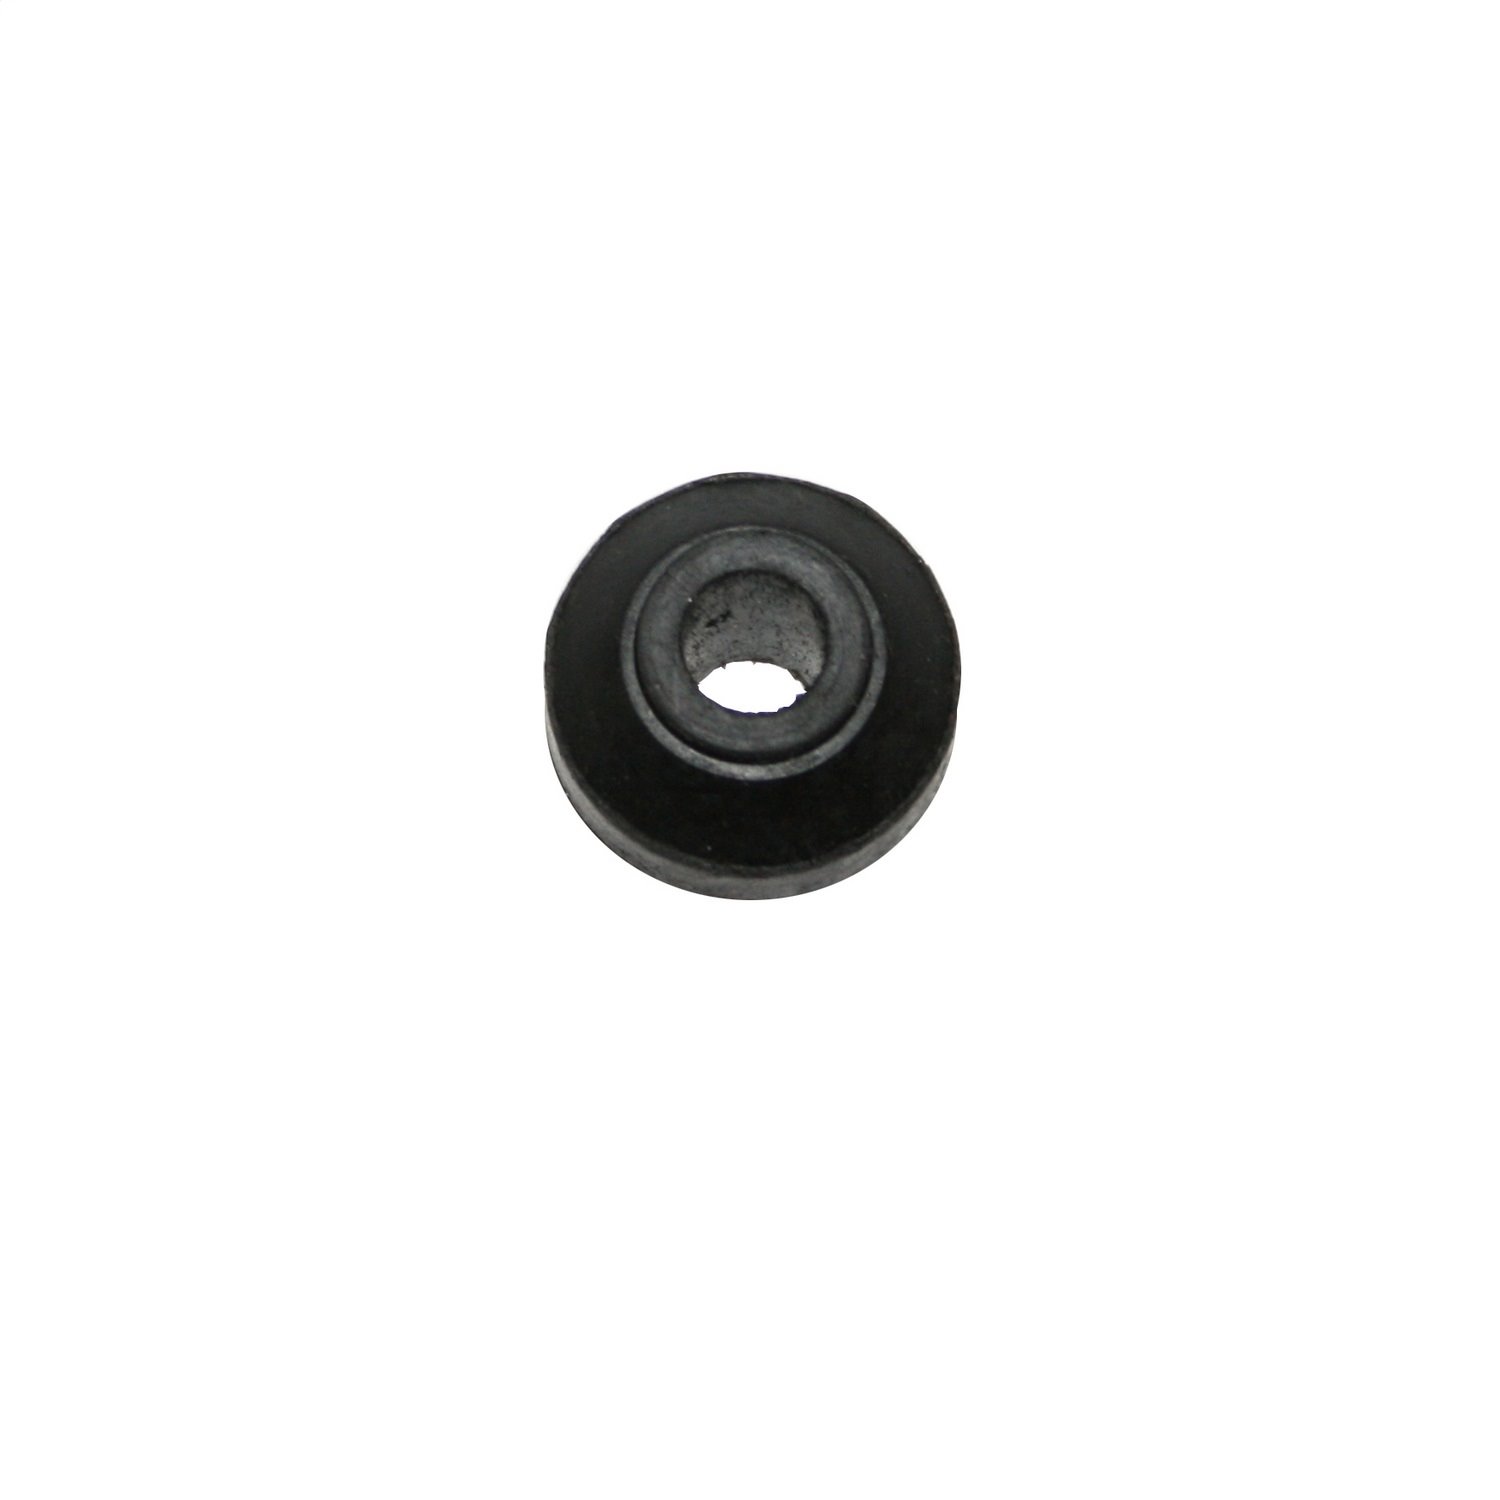 Replacement front sway bar end link bushing from Omix-ADA, Fits 84-01 Jeep Cherokee XJ and 93-98 ZJ Grand Cherokees.